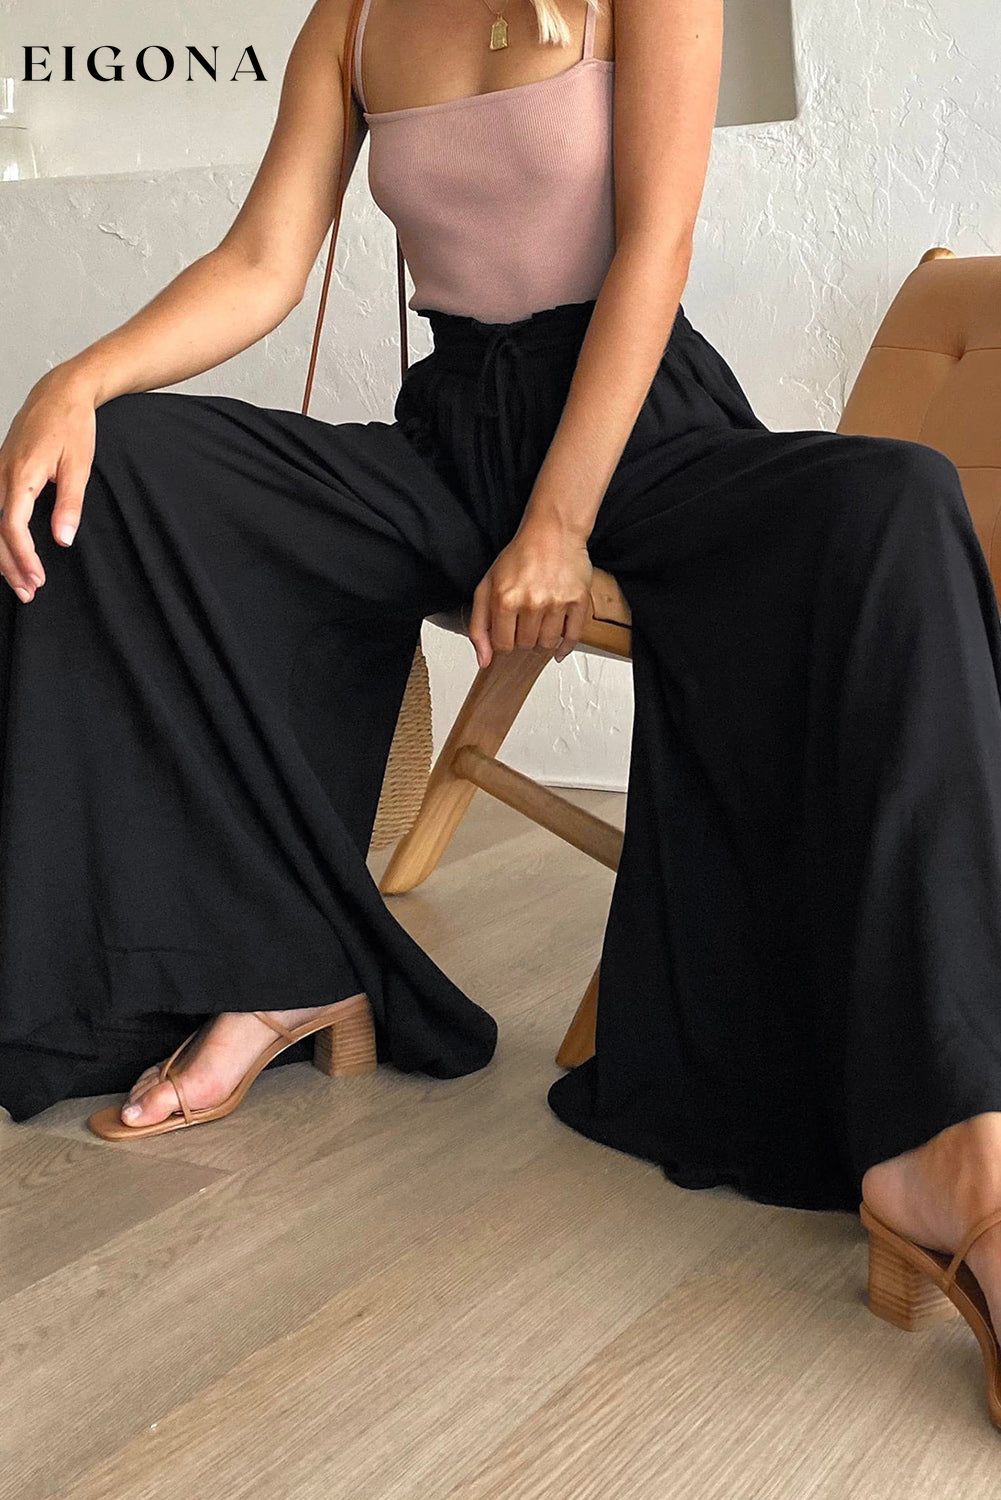 Black Drawstring Smocked High Waist Wide Leg Pants All In Stock bottoms clothes clothing Occasion Vacation Print Solid Color Season Summer Silhouette Wide Leg Style Casual wide leg pants Women's Bottoms